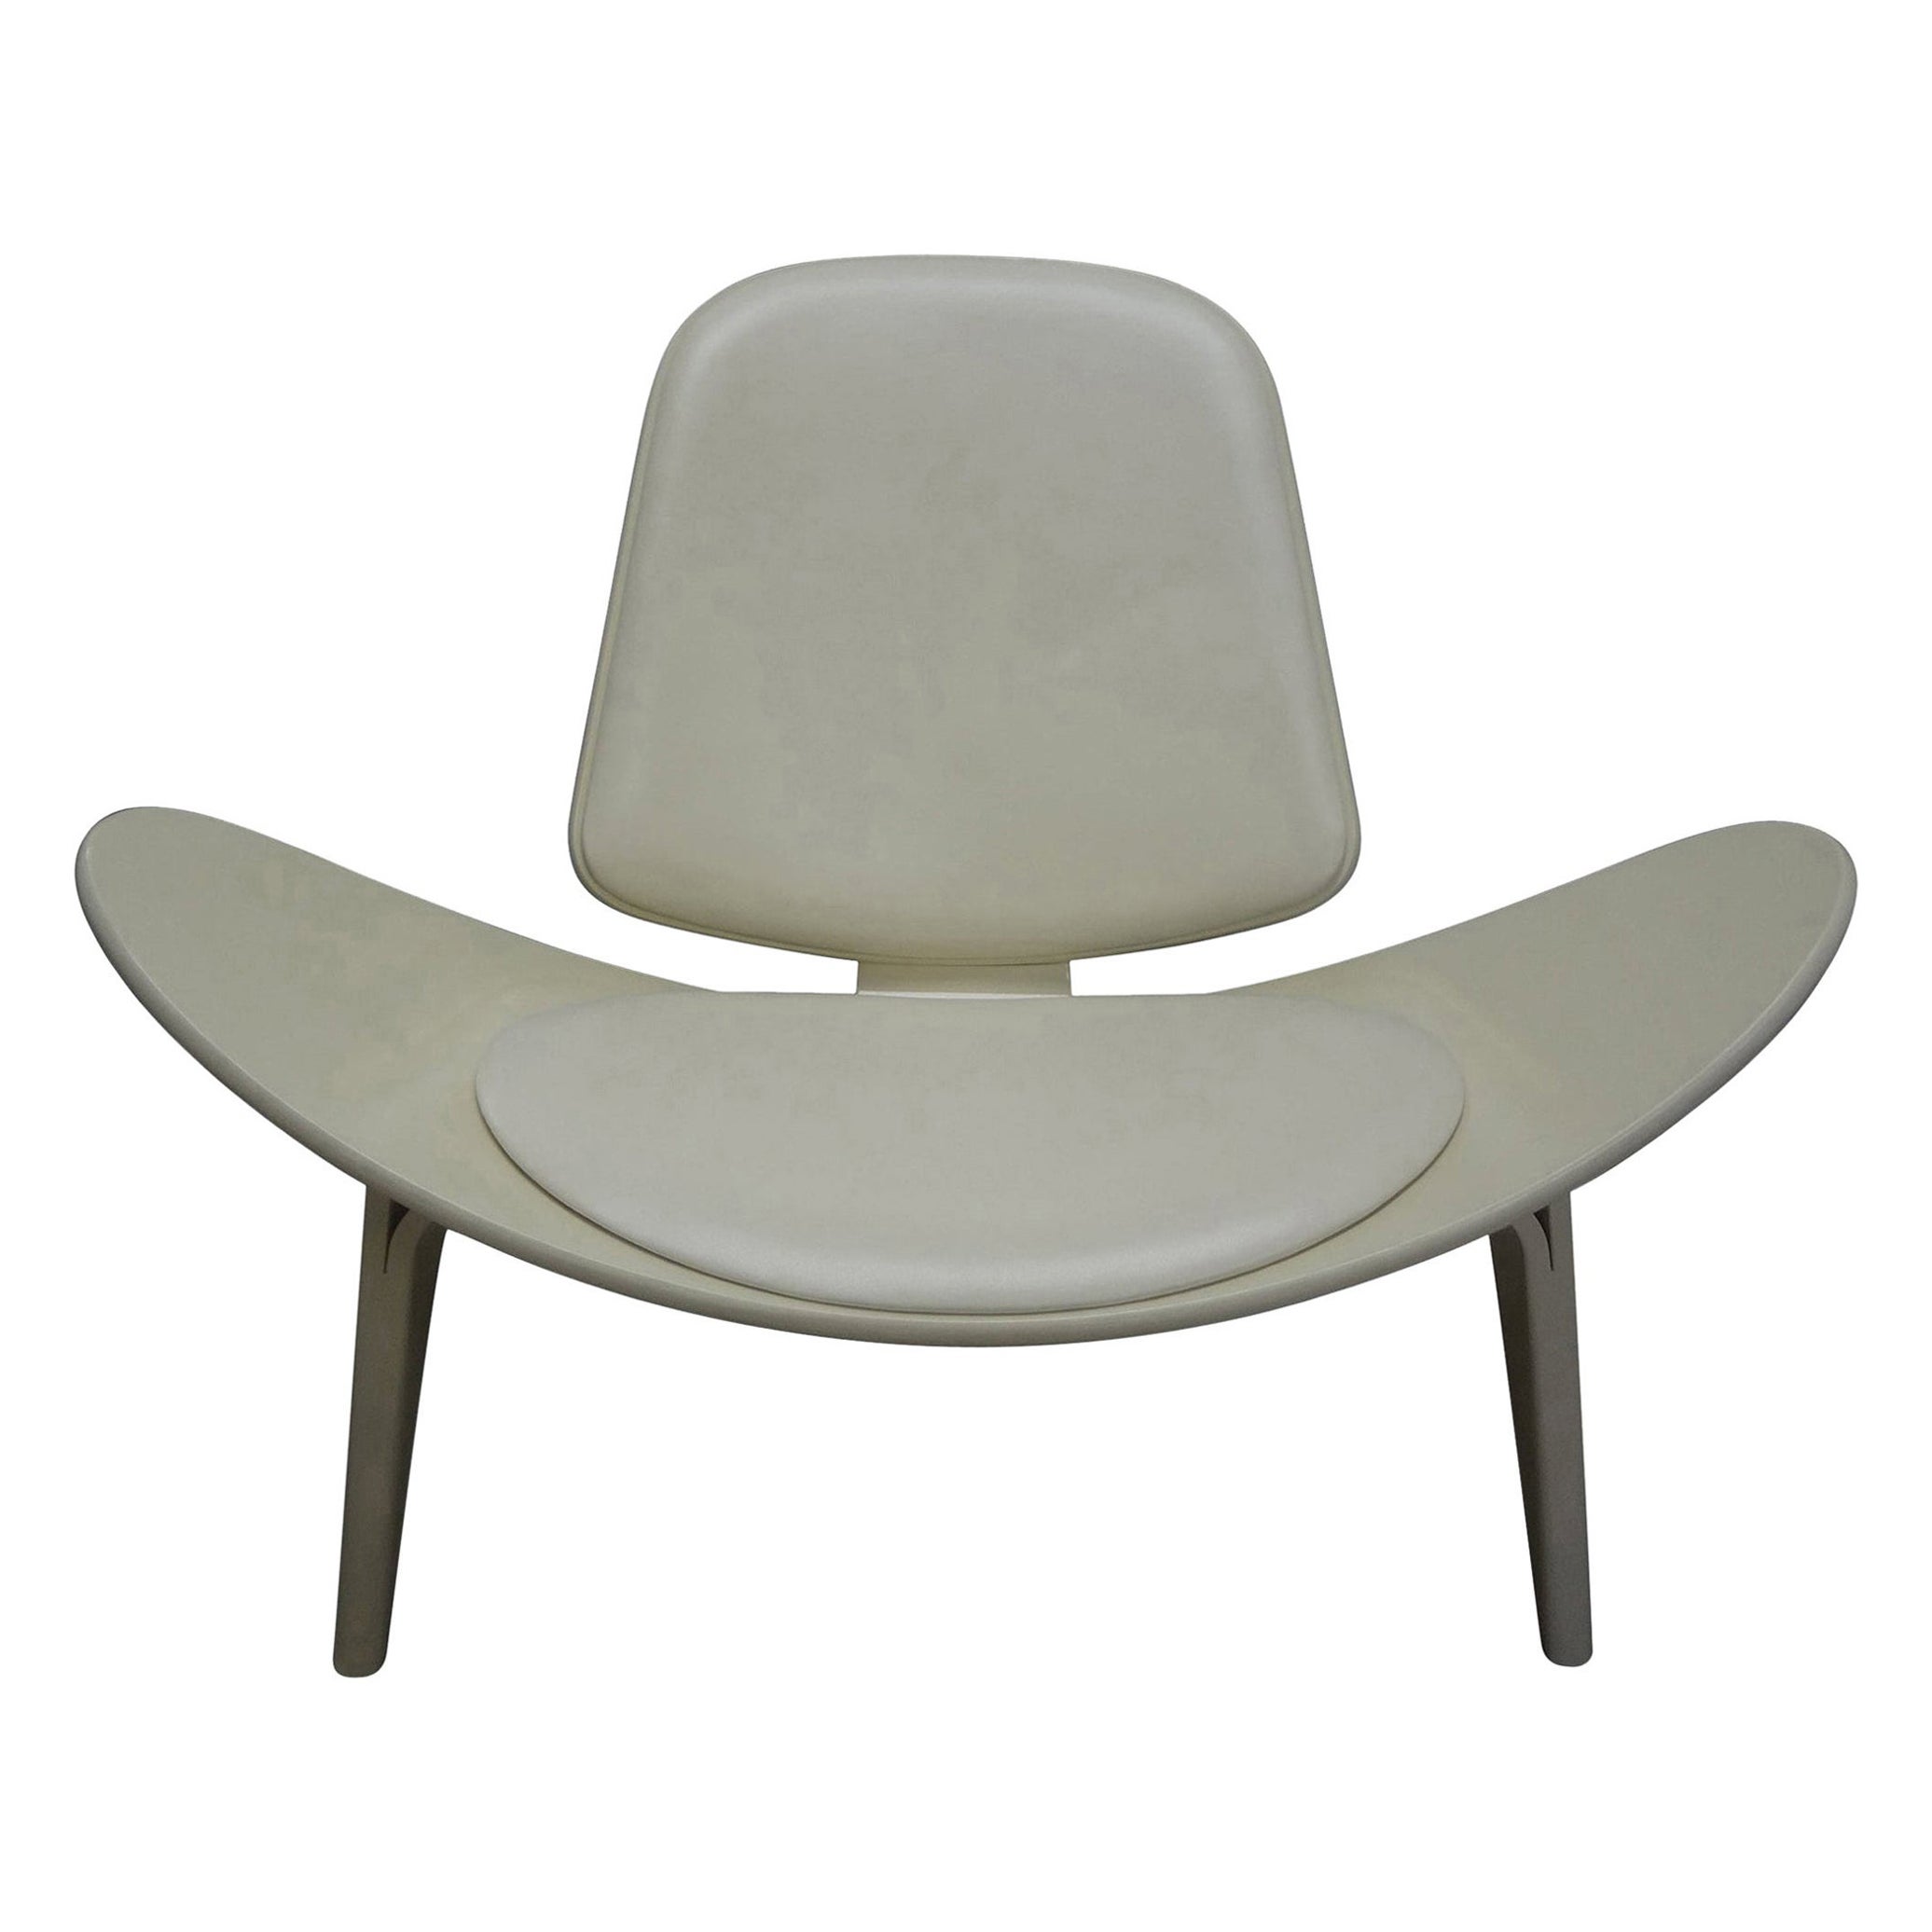 Iconic 20th Century Hans Wegner Lacquer and Leather Shell Chair For Sale